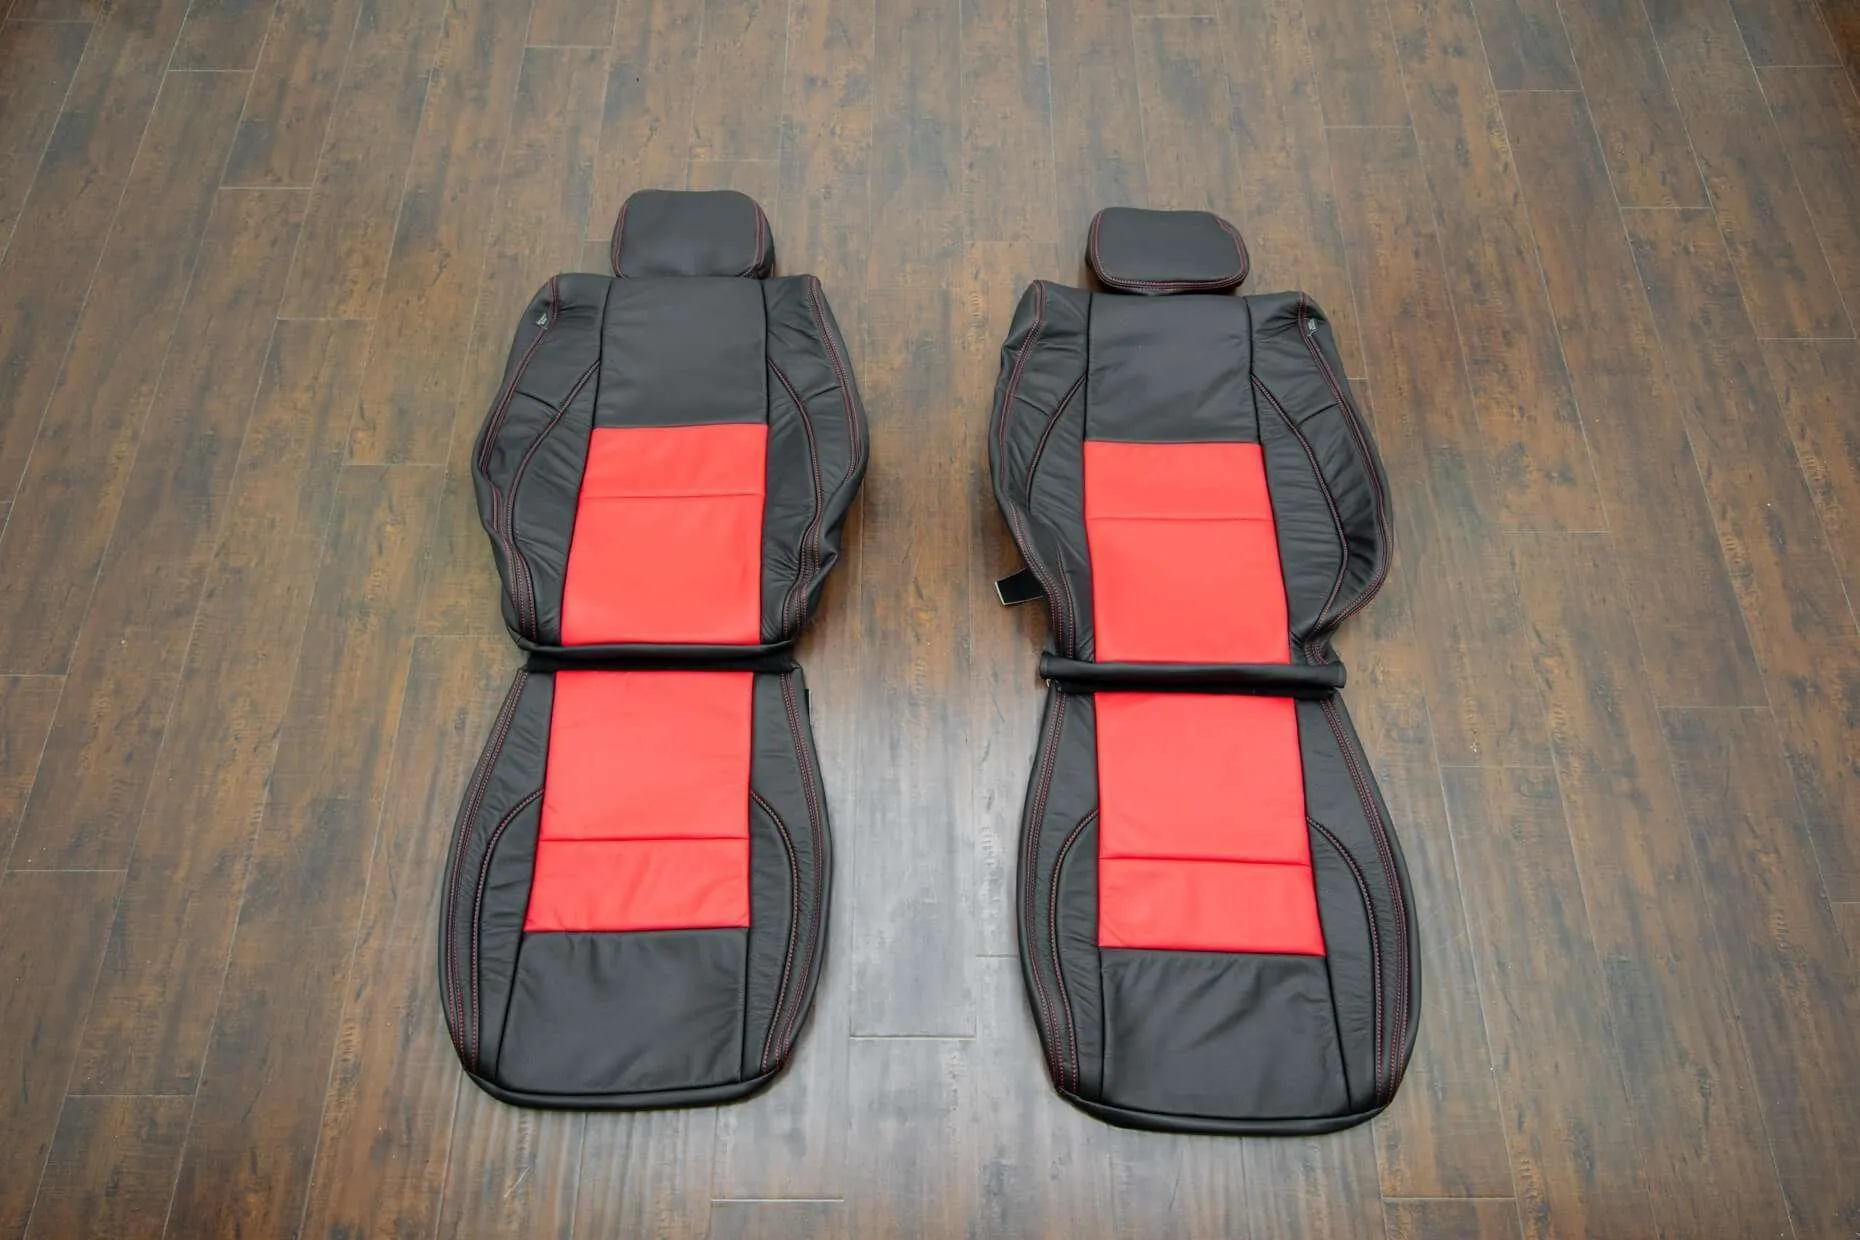 2011-2018 Dodge Durango Upholstery Kit- Black & Bright Red -Front seats